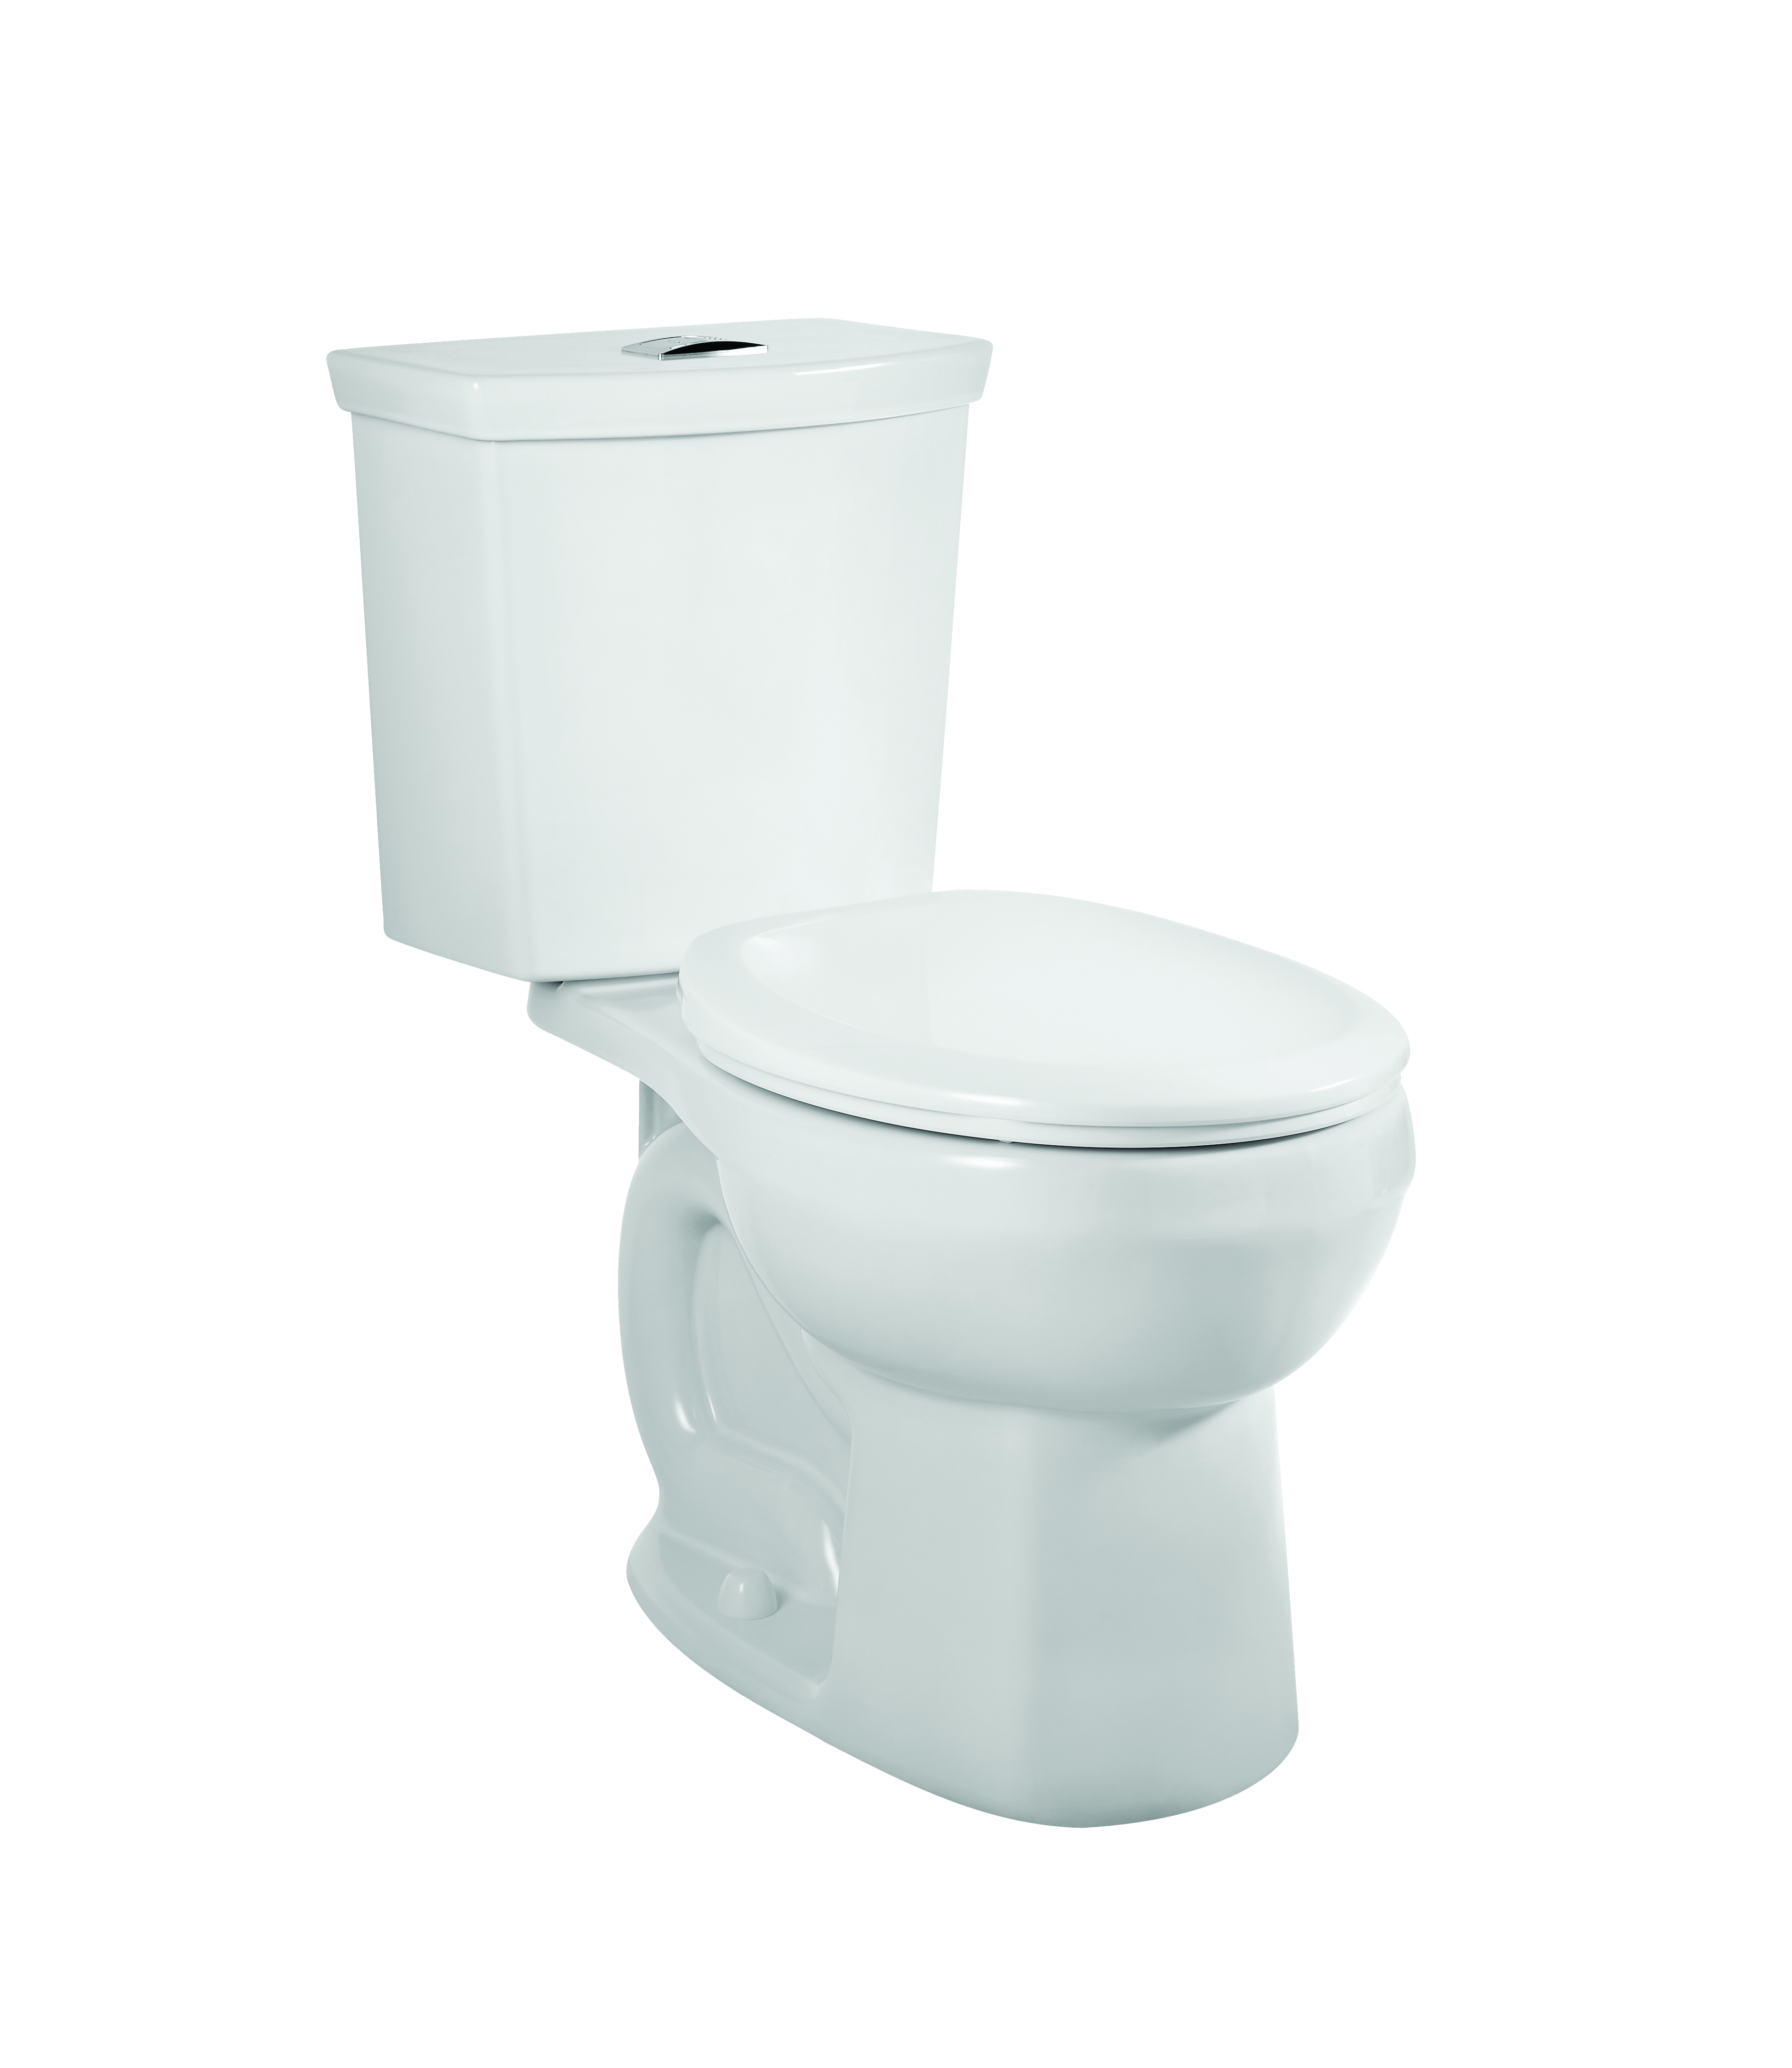 Ravenna 3 Two-Piece Dual Flush 1.6 gpf/6.0 Lpf and 1.0 gpf/3.8 Lpf Chair Height Elongated Complete Toilet With Seat and Lined Tank